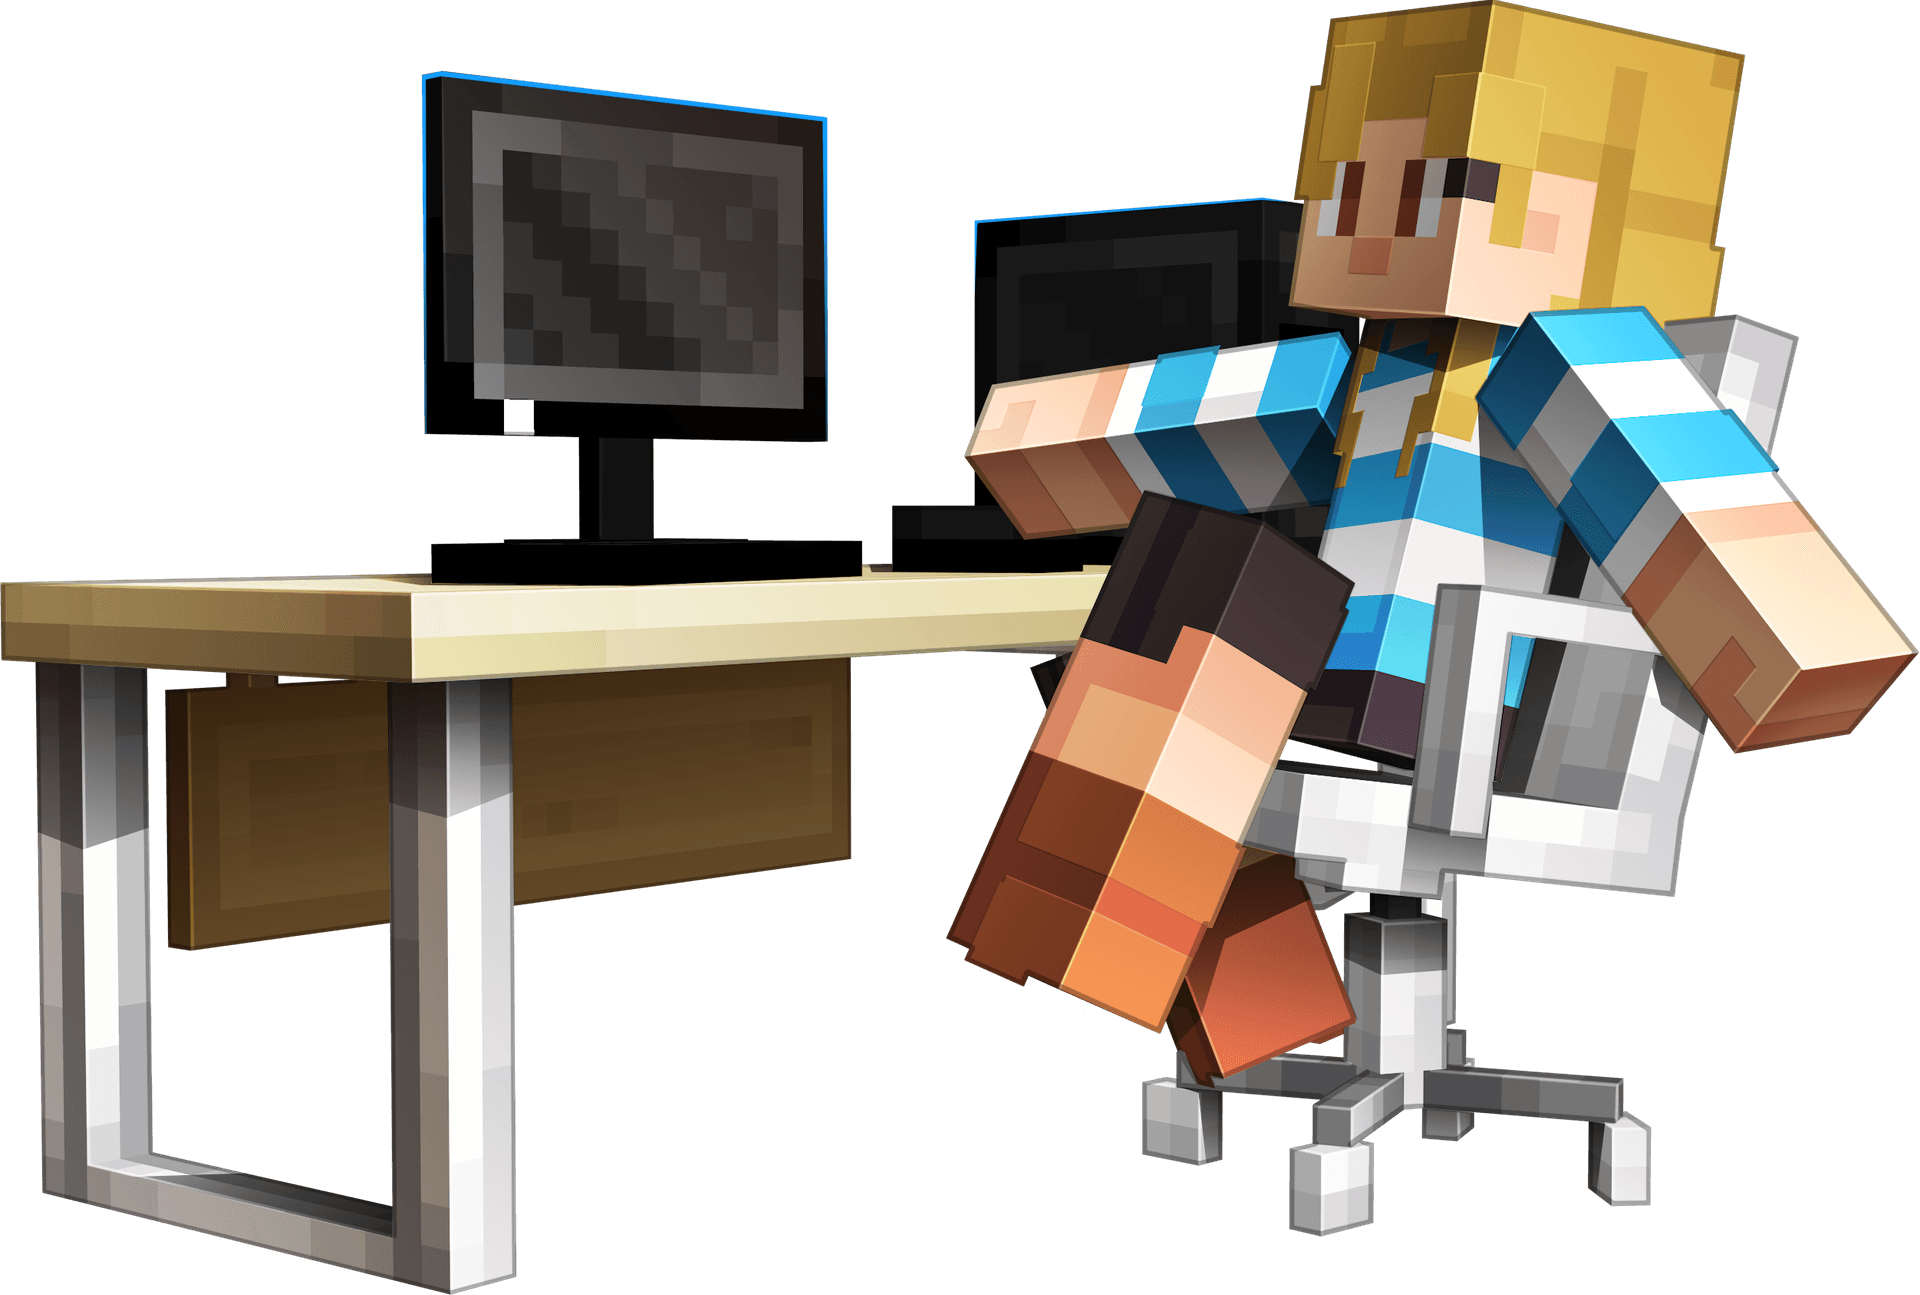 Cool looking customised Minecraft character sitting for a computer.